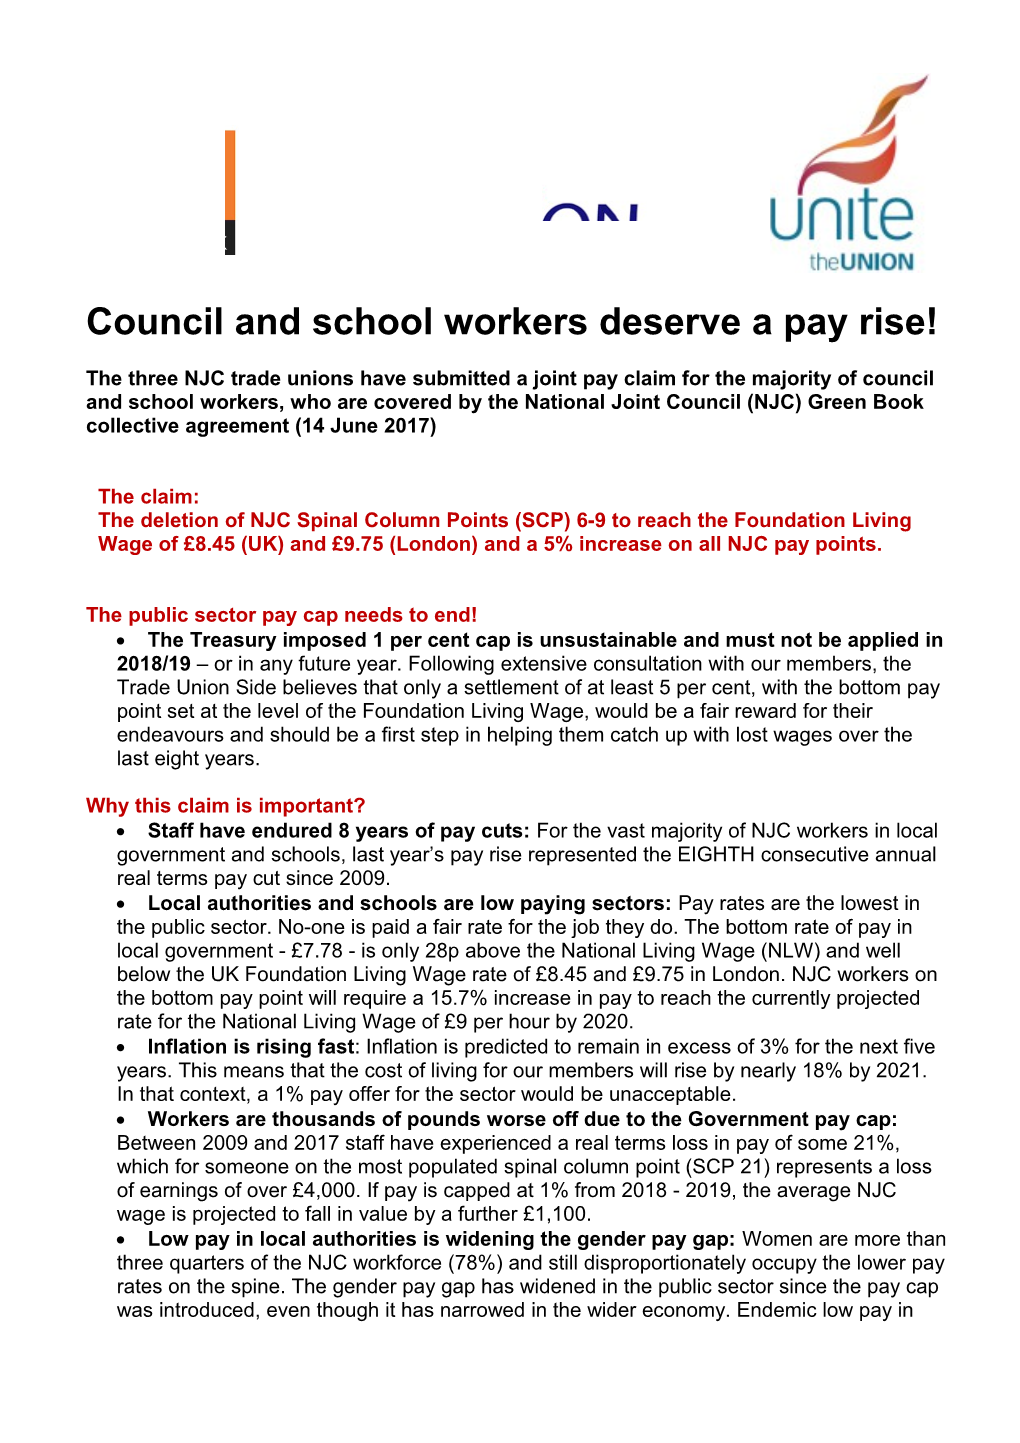 Council and School Workers Deserve a Pay Rise!